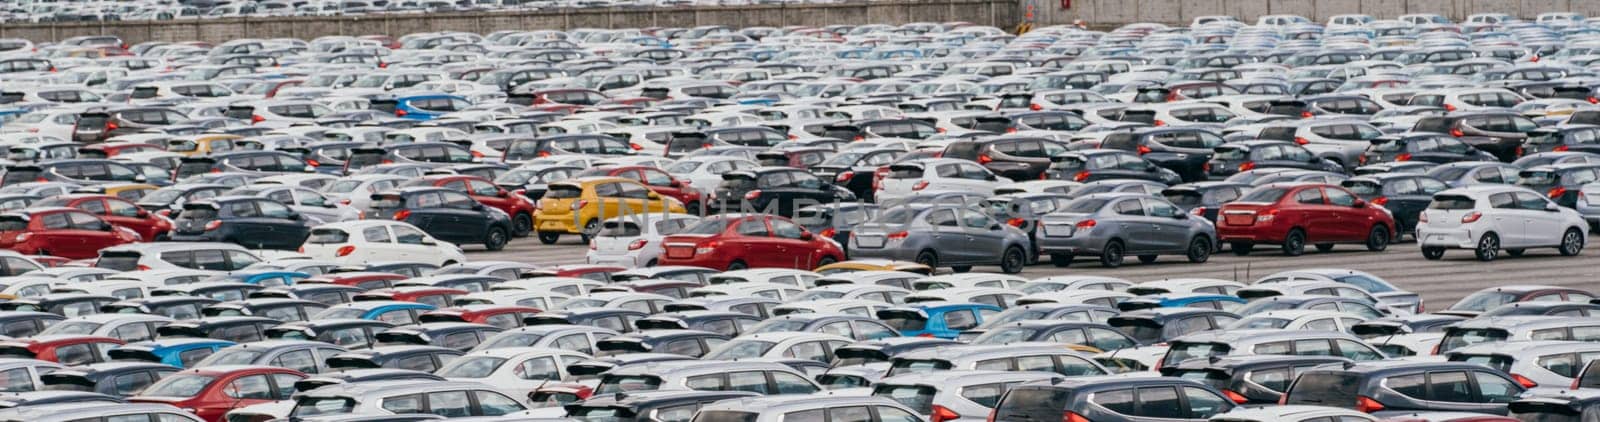 Lamchabang, Thailand - July 02, 2023 On a sunny day at a car factory, rows of new cars are parked in a distribution centera top view of the bustling parking lot is a testament to modern industry.